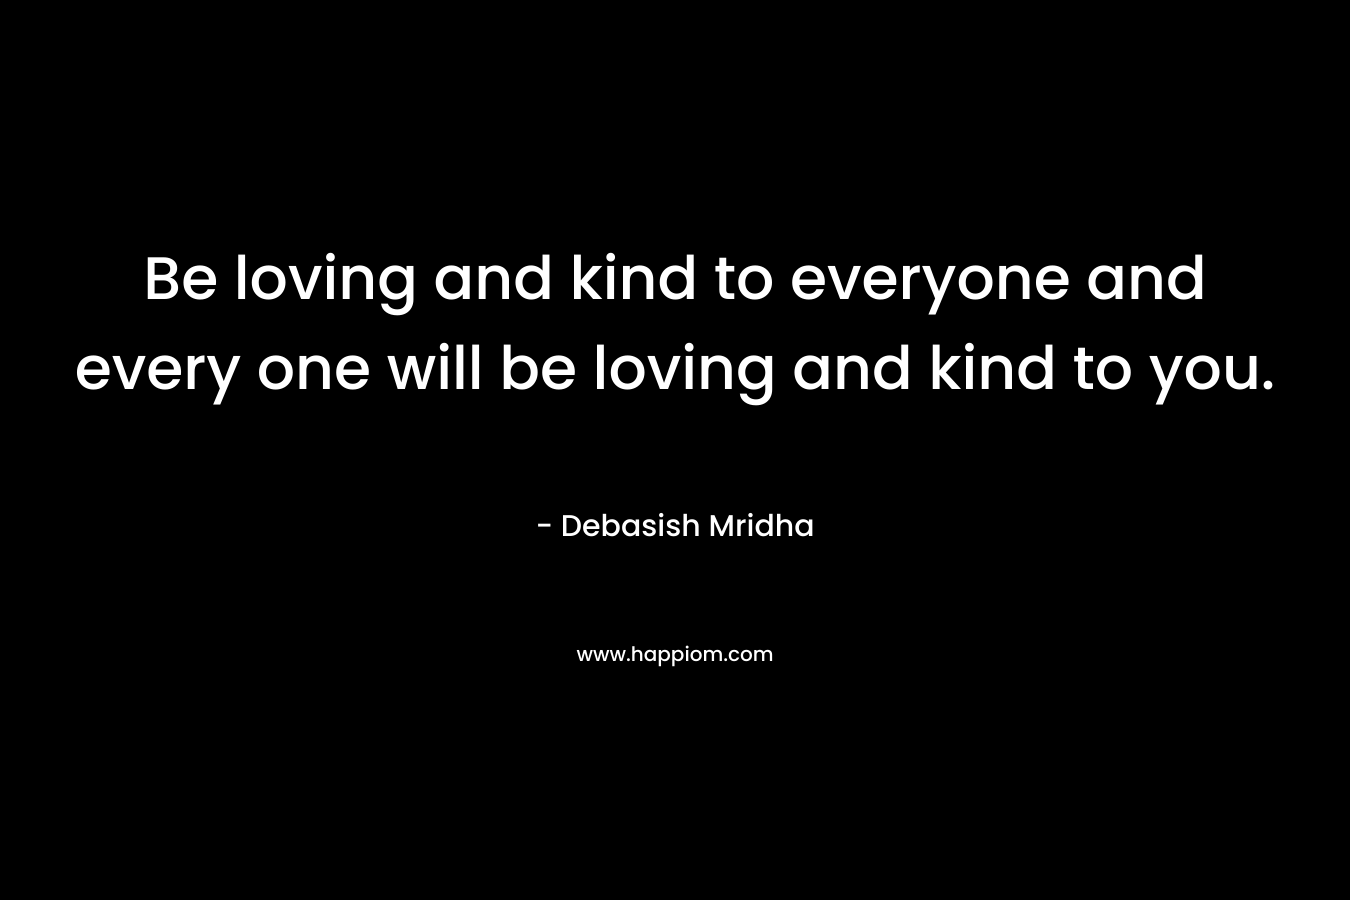 Be loving and kind to everyone and every one will be loving and kind to you.